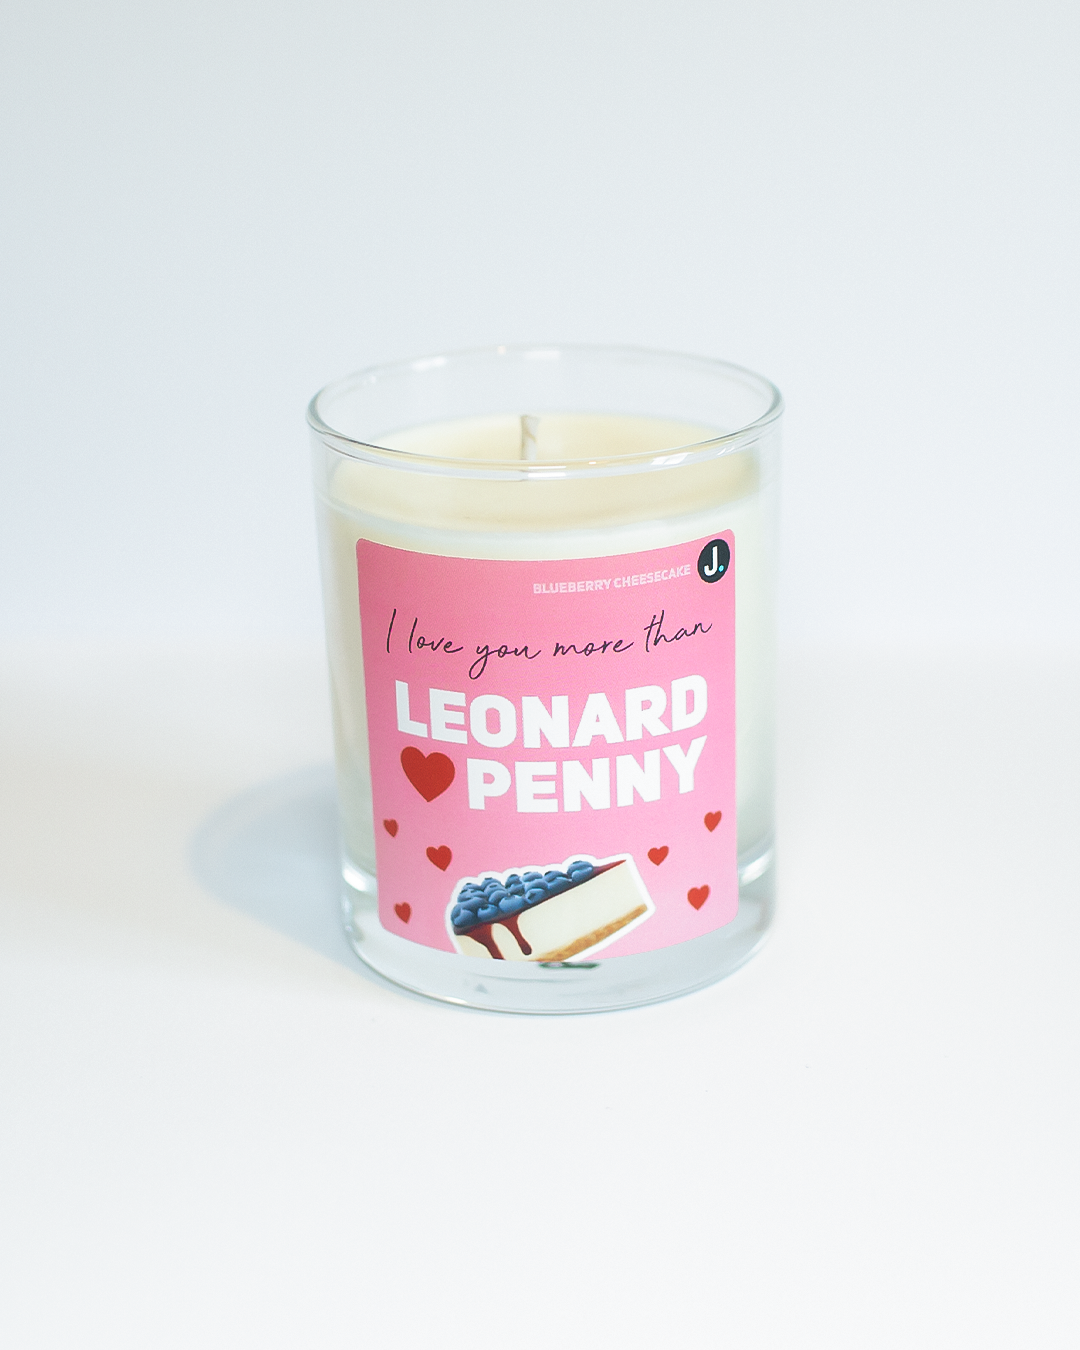 Leonard & Penny (Blueberry Cheesecake) The Big Bang Theory Inspired Candle - The Big Bang Theory Inspired Candle